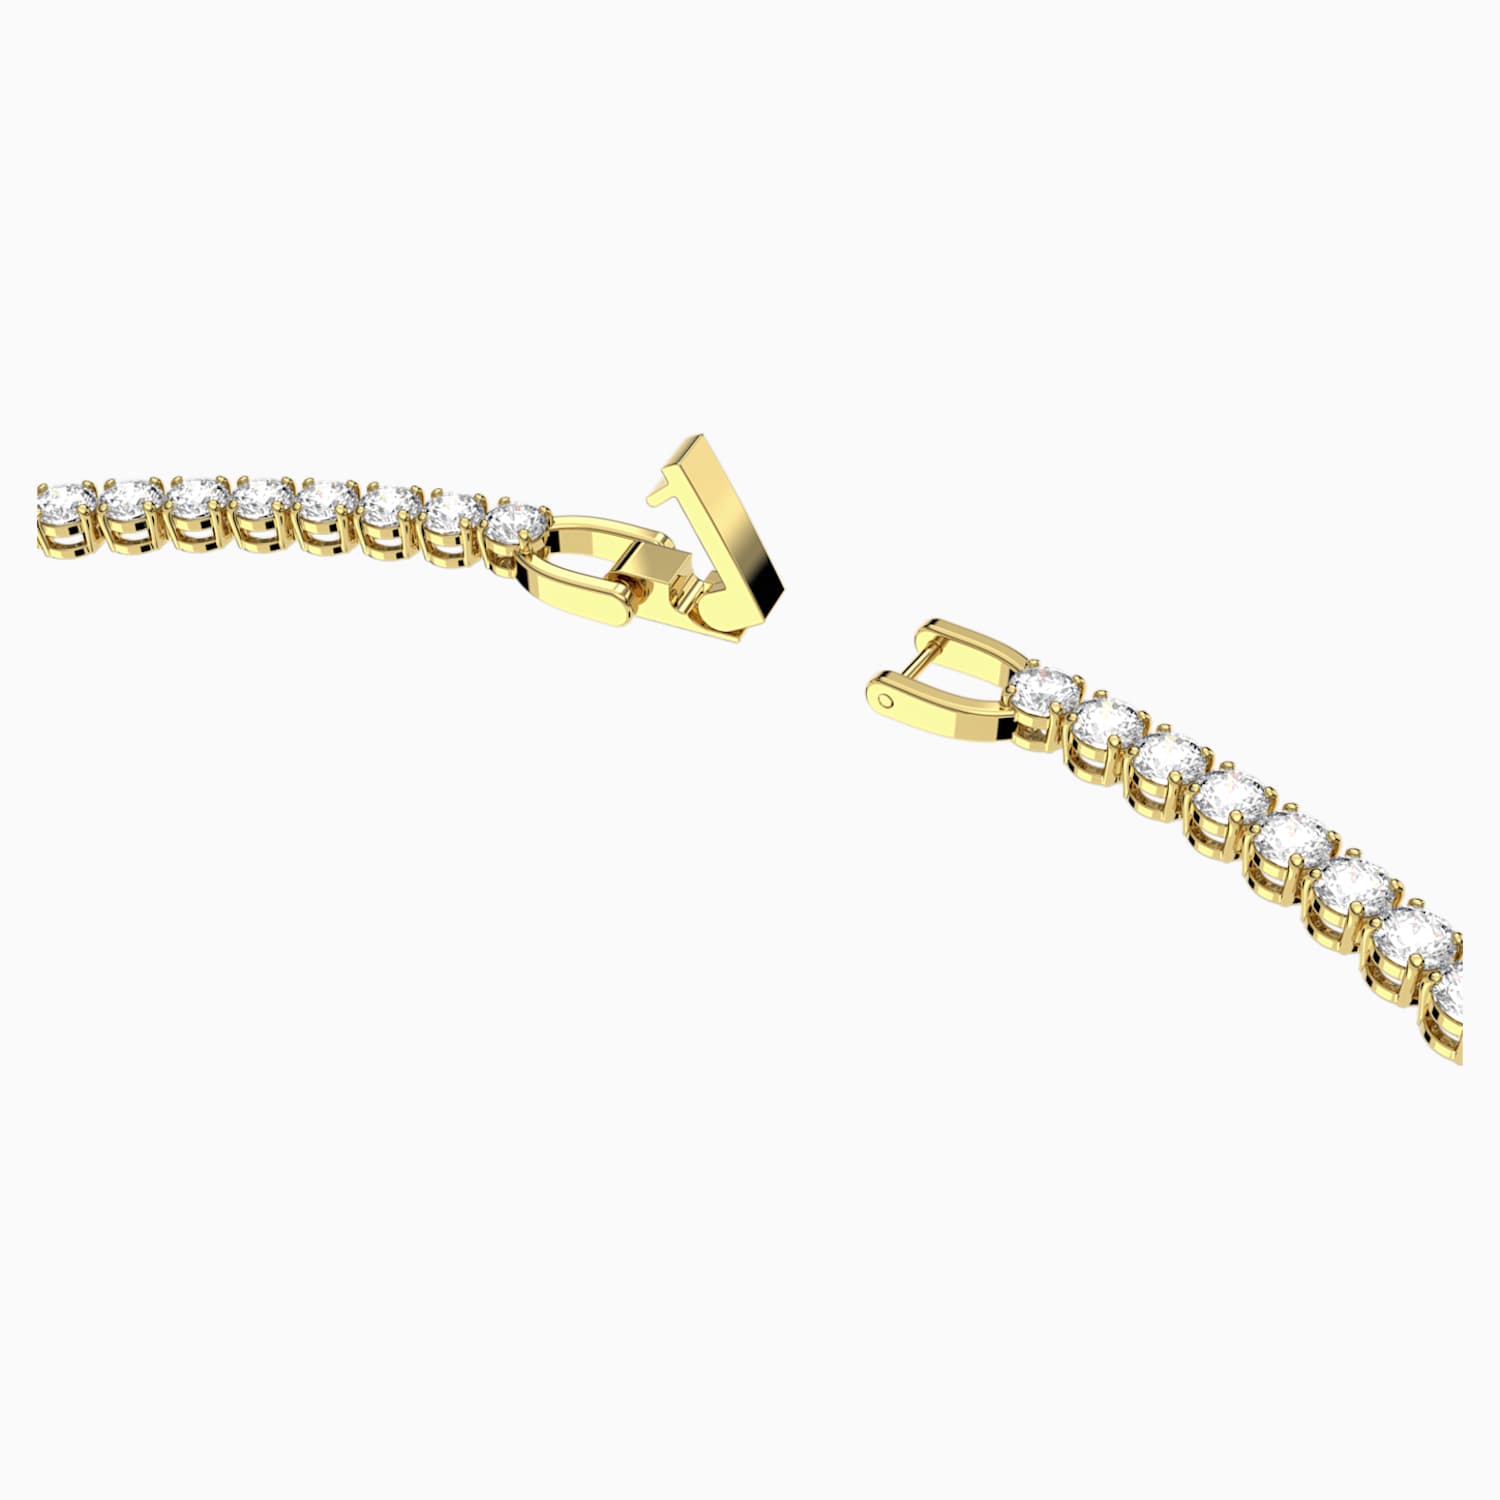 Tennis Deluxe Necklace, White, Gold 